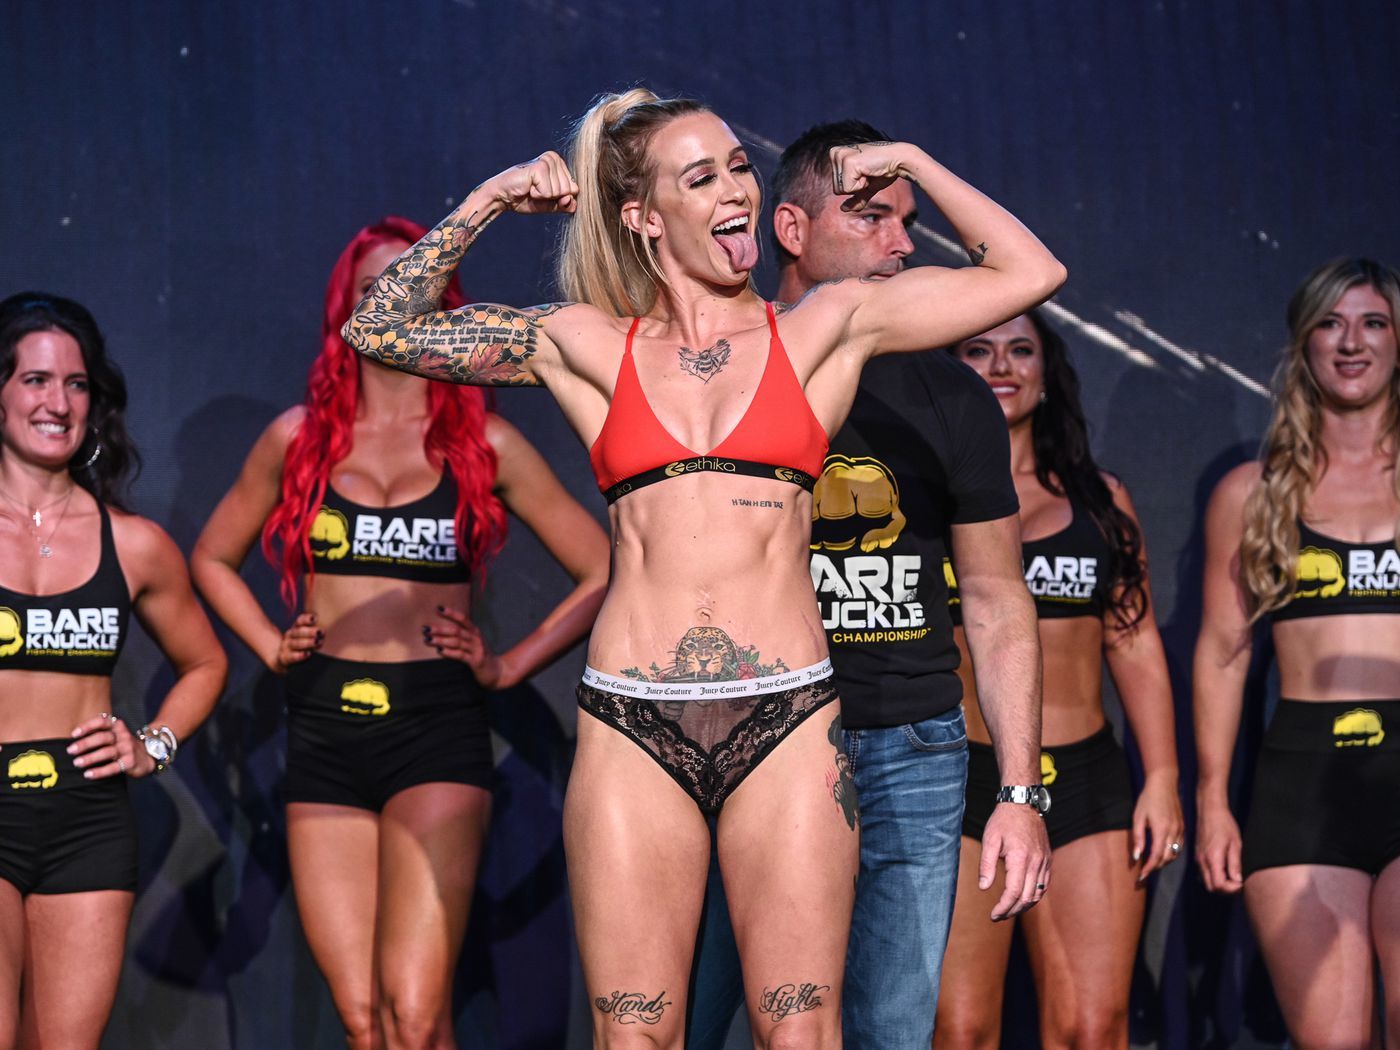 BKFC fighter Starling boasts her body in revealing lingerie